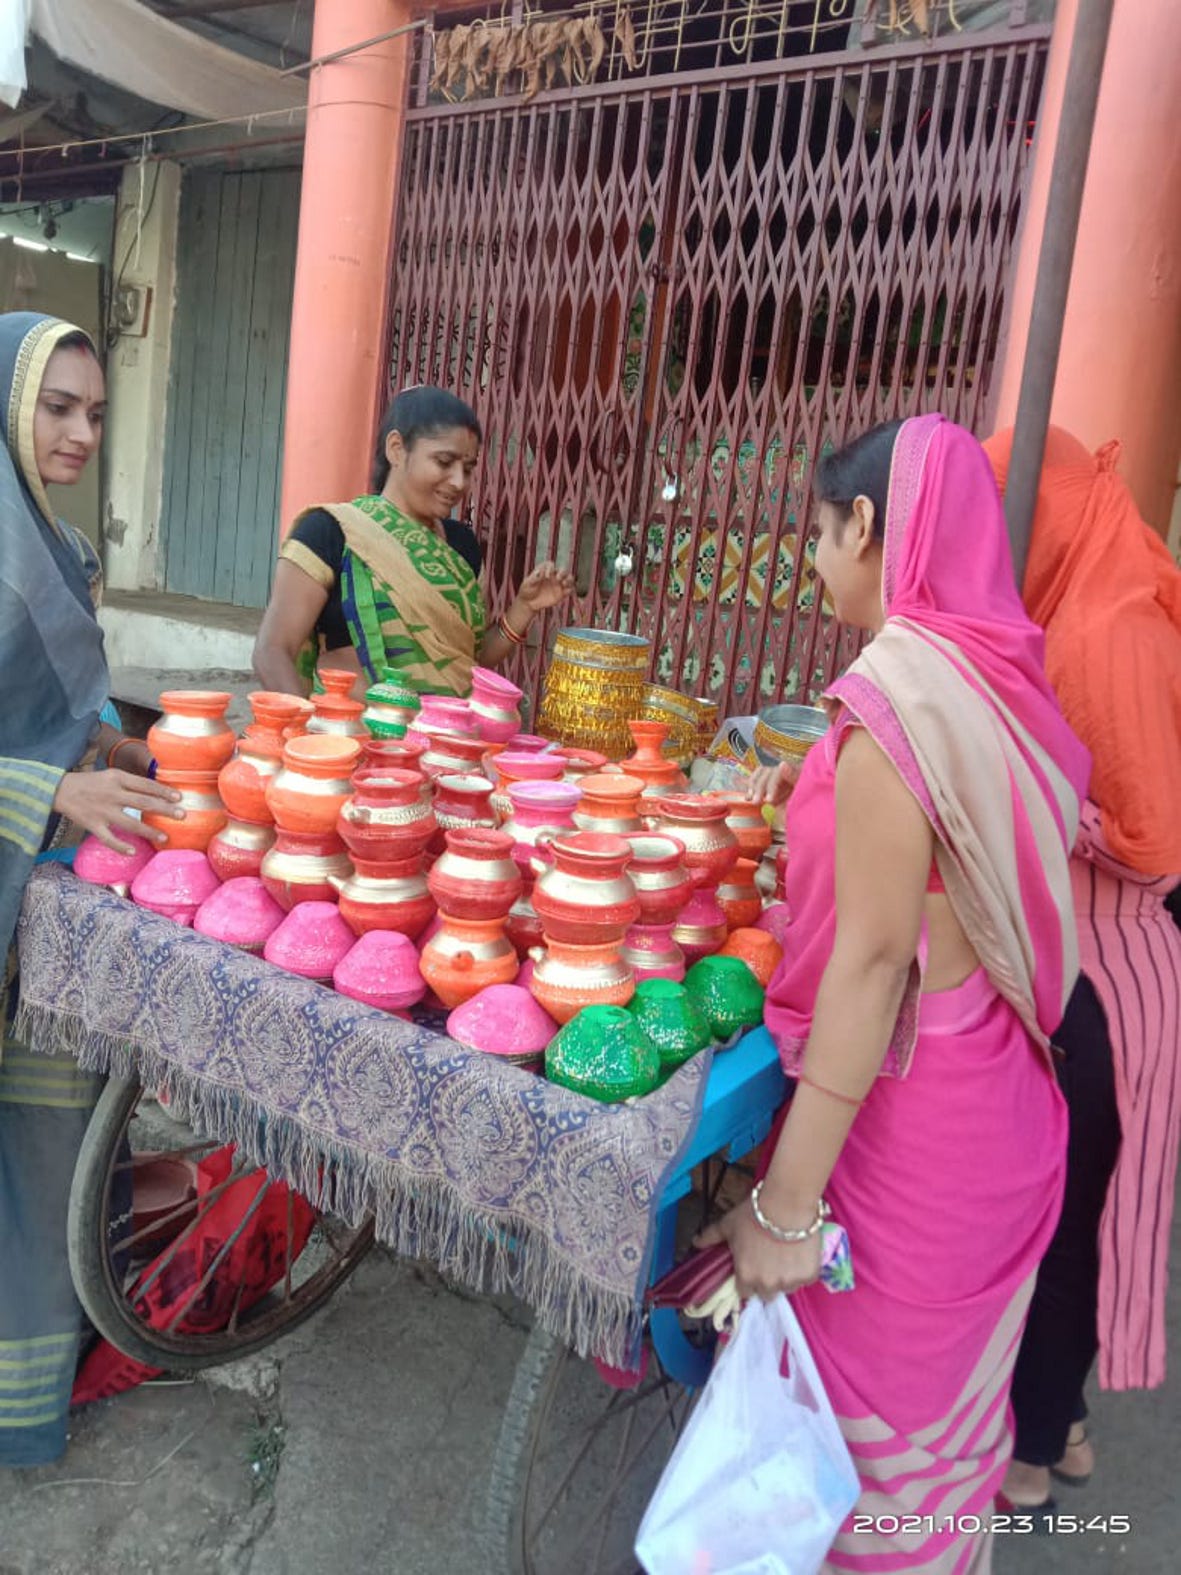 Women will observe nirjala fast for the longevity and good fortune of the suhaag